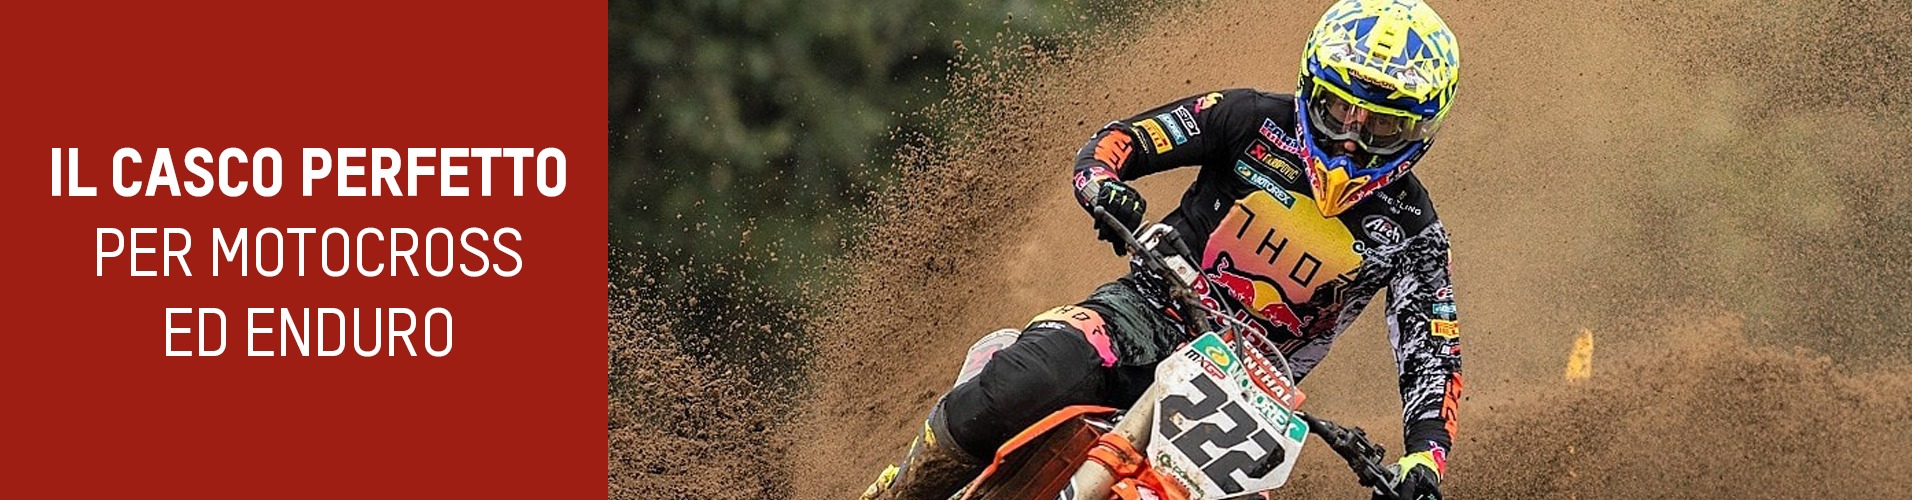 Motocross and Enduro: how to choose the right helmet